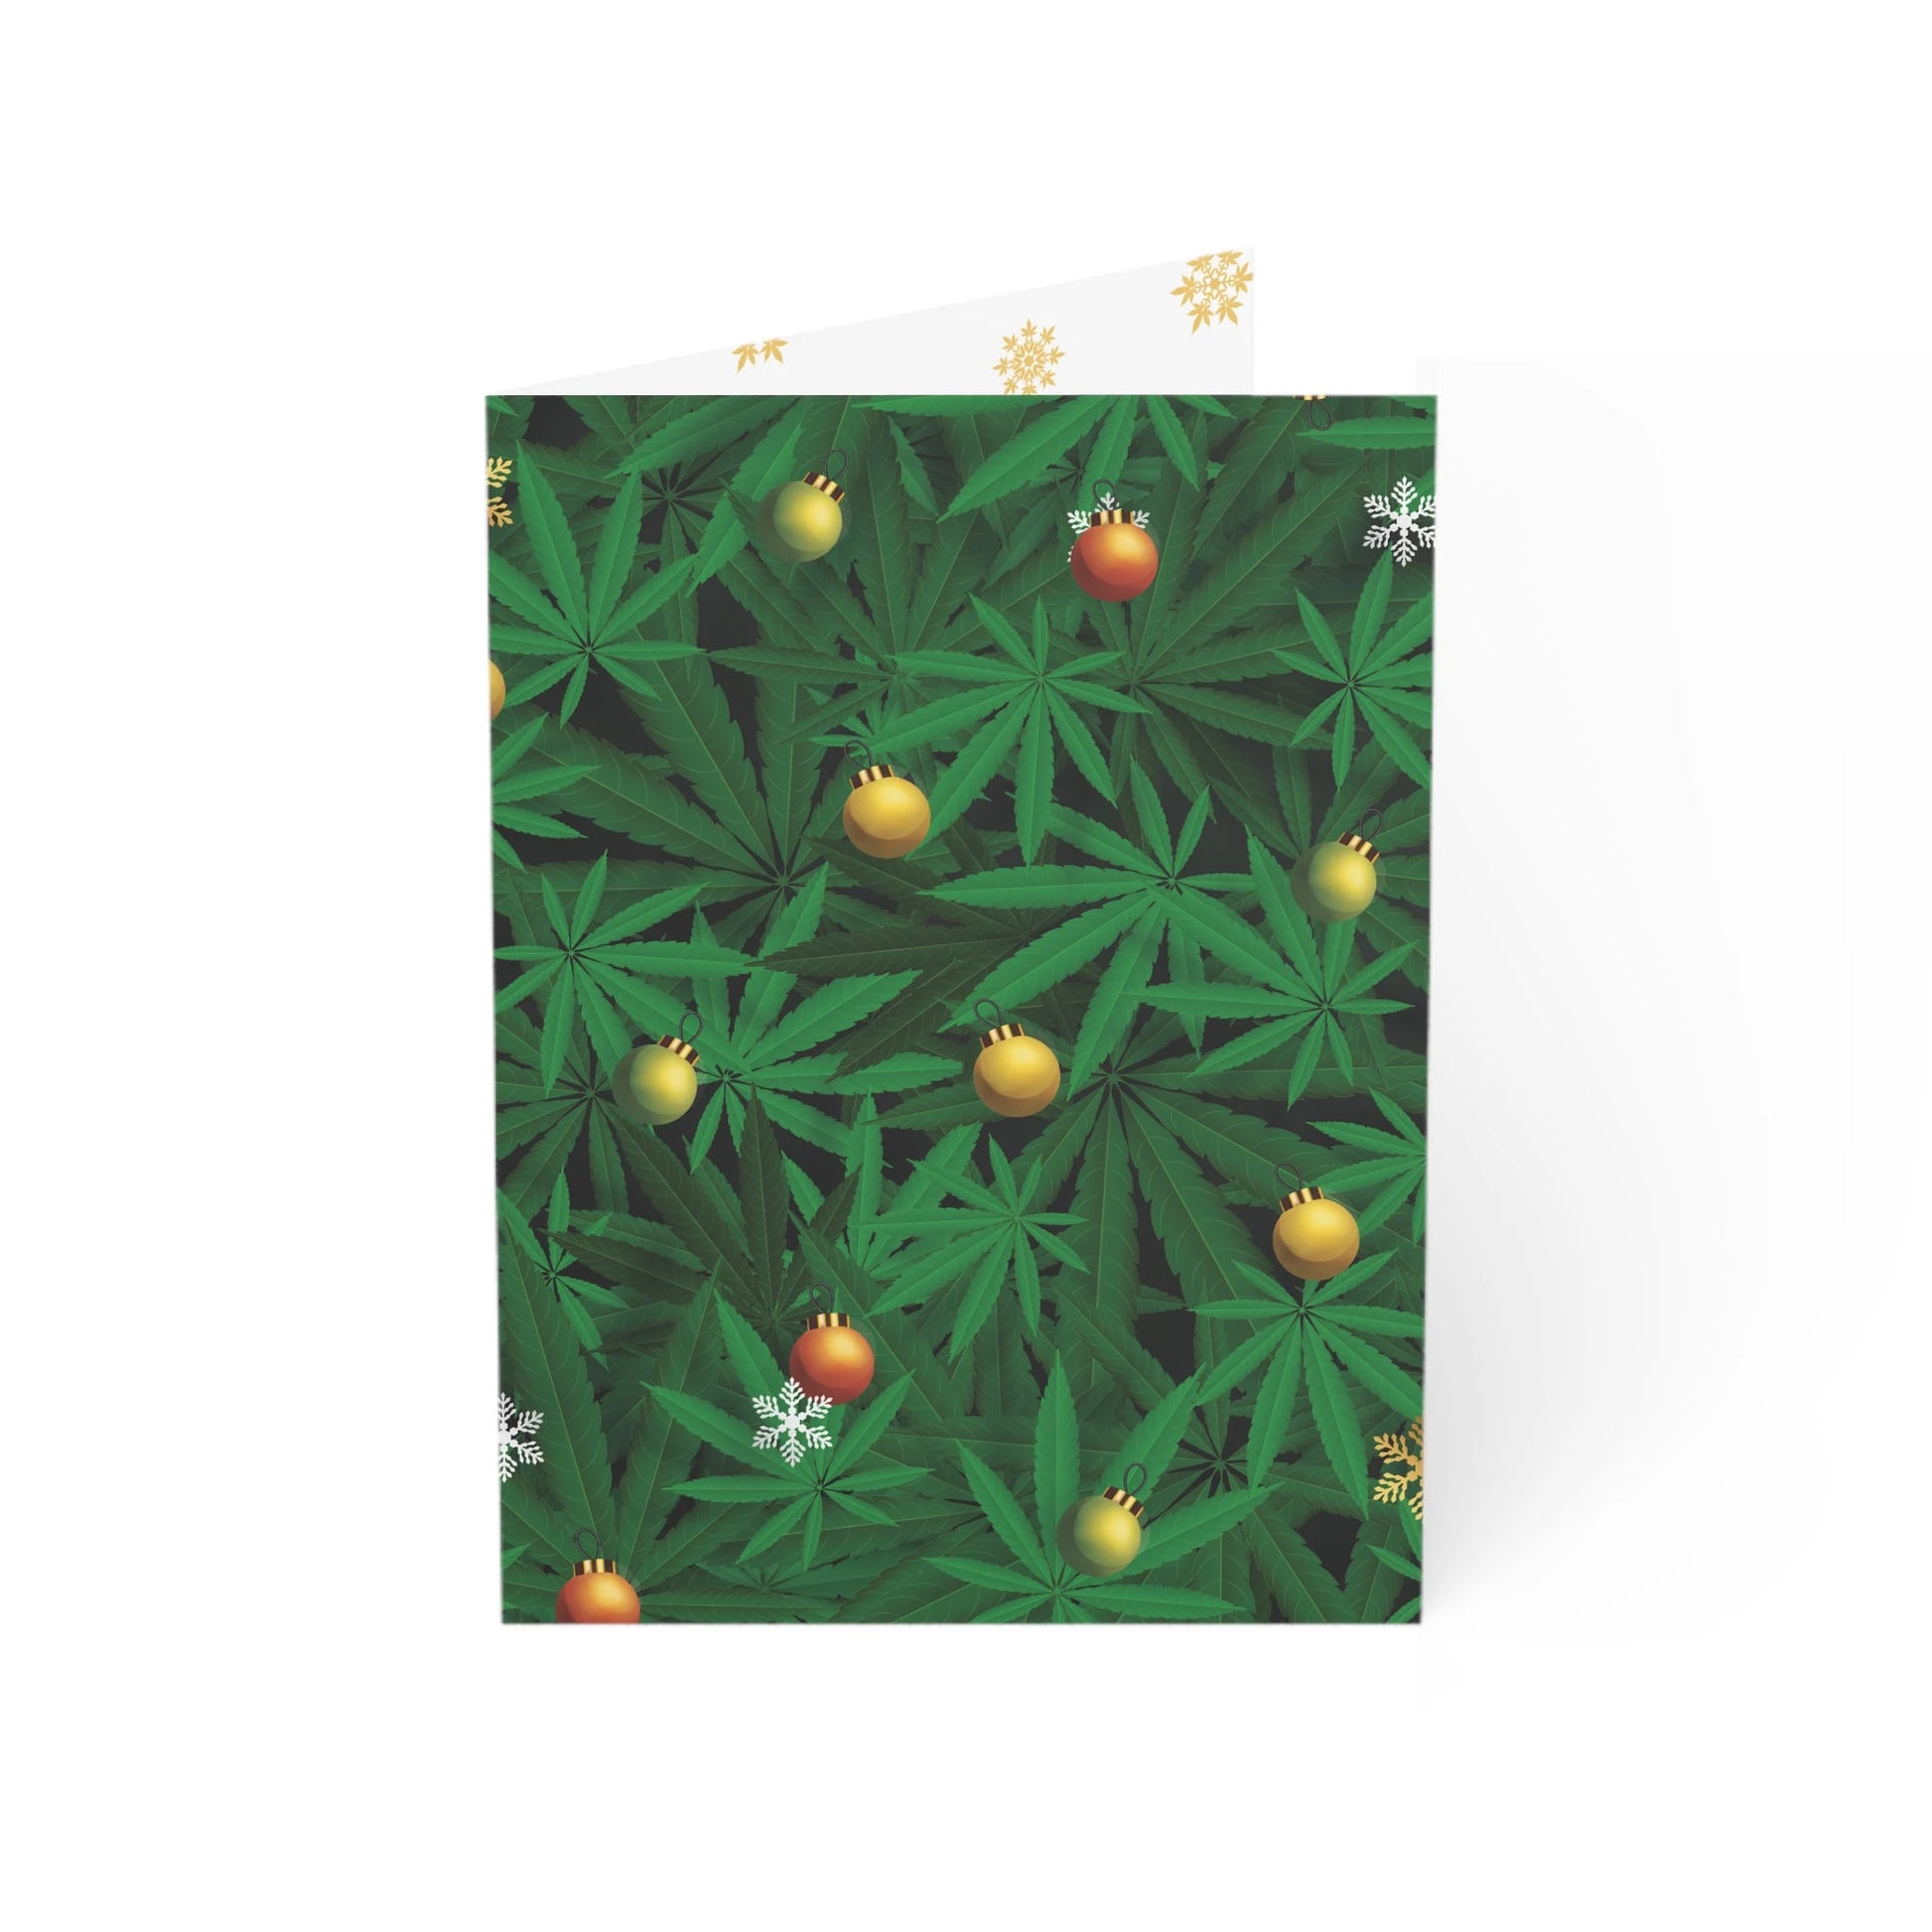 A Christmas card mockup partially unfolded, showing a design of green cannabis leaves with festive ornaments on the right and a blank white interior on the left.